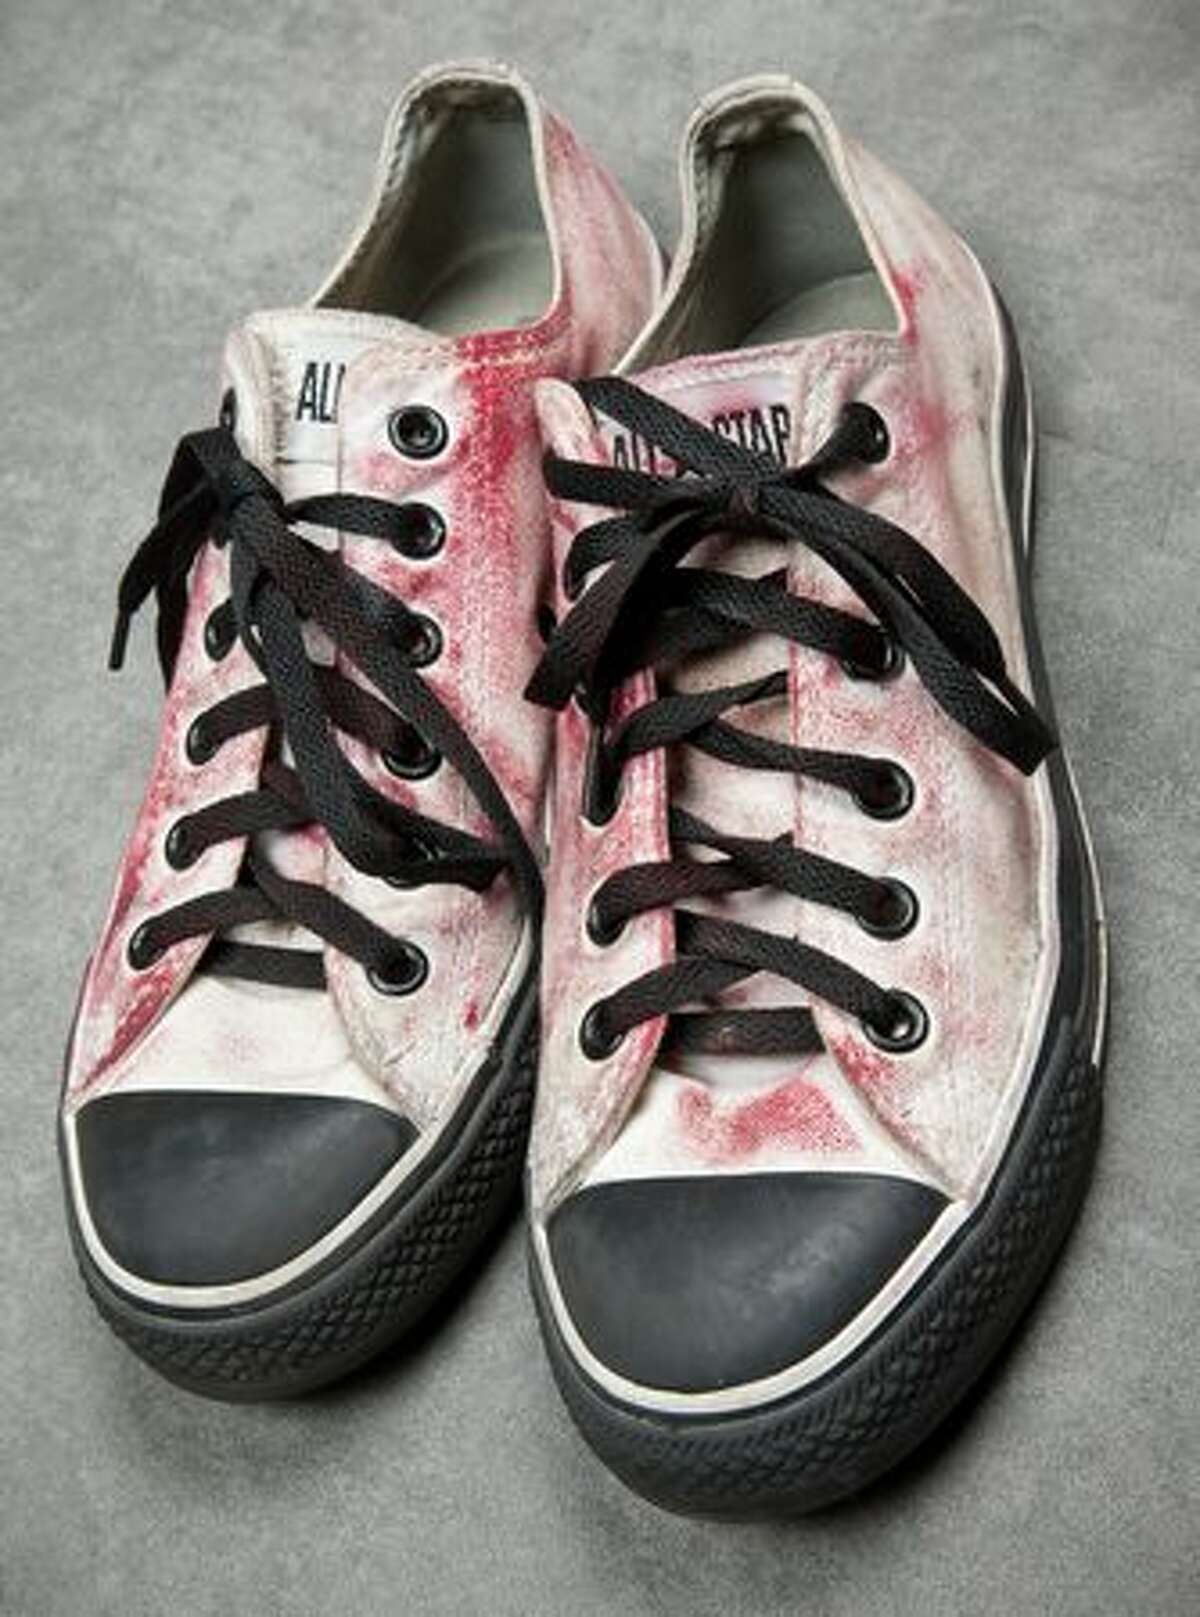 The shoes of William "wiL" Francis frontman for Seattle horrorcore upstarts Aiden. Worn during the "Taste of Chaos" tour in 2007.(Hard Rock International)